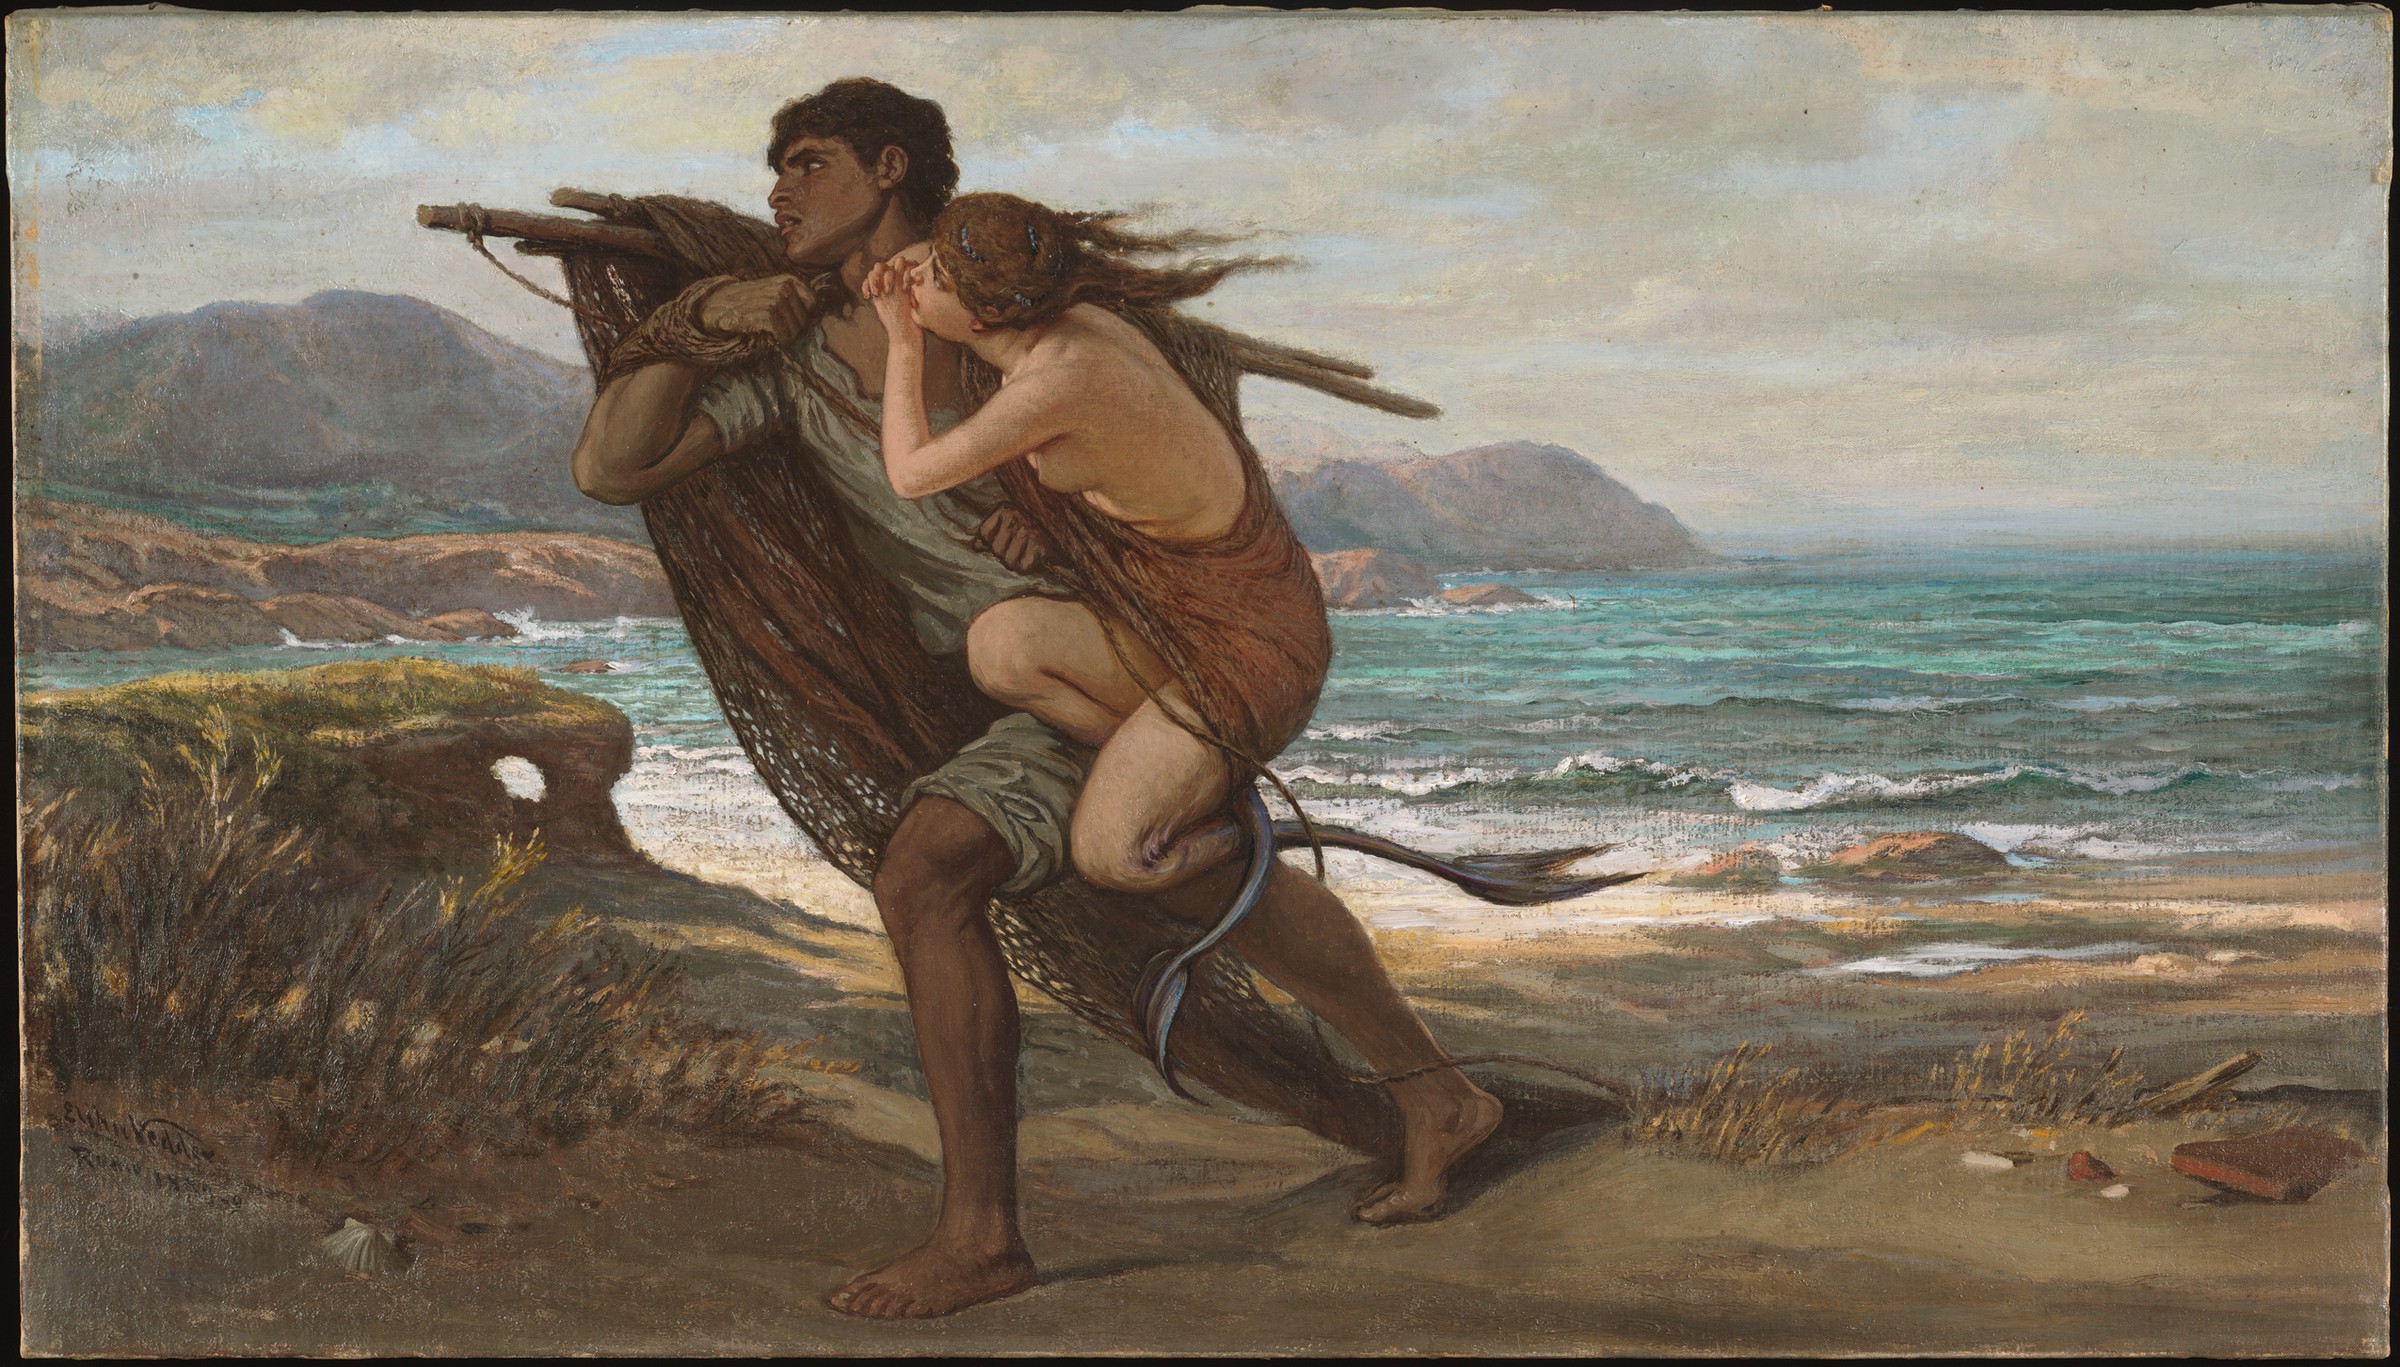 A fisherman carries a mermaid off the shore.